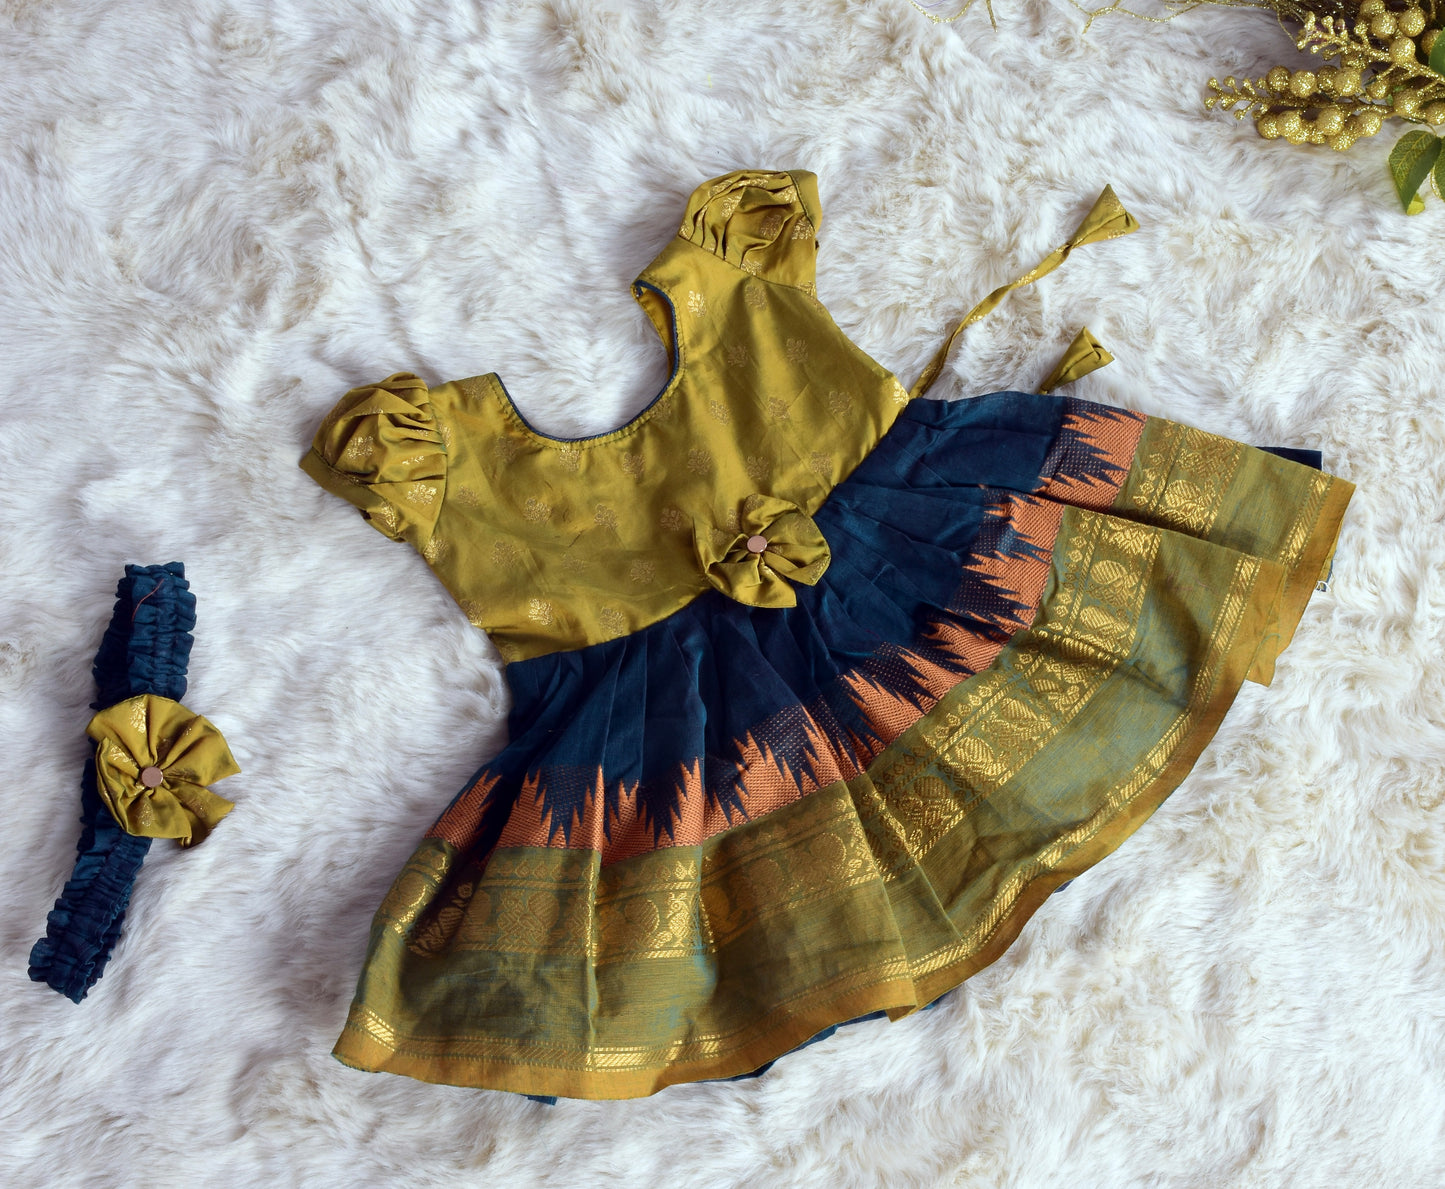 Olive Green with dark blue (Vintage bow) Big Border - Kanchi Cotton Silk South Indian Ethnic Frock for Baby Girl